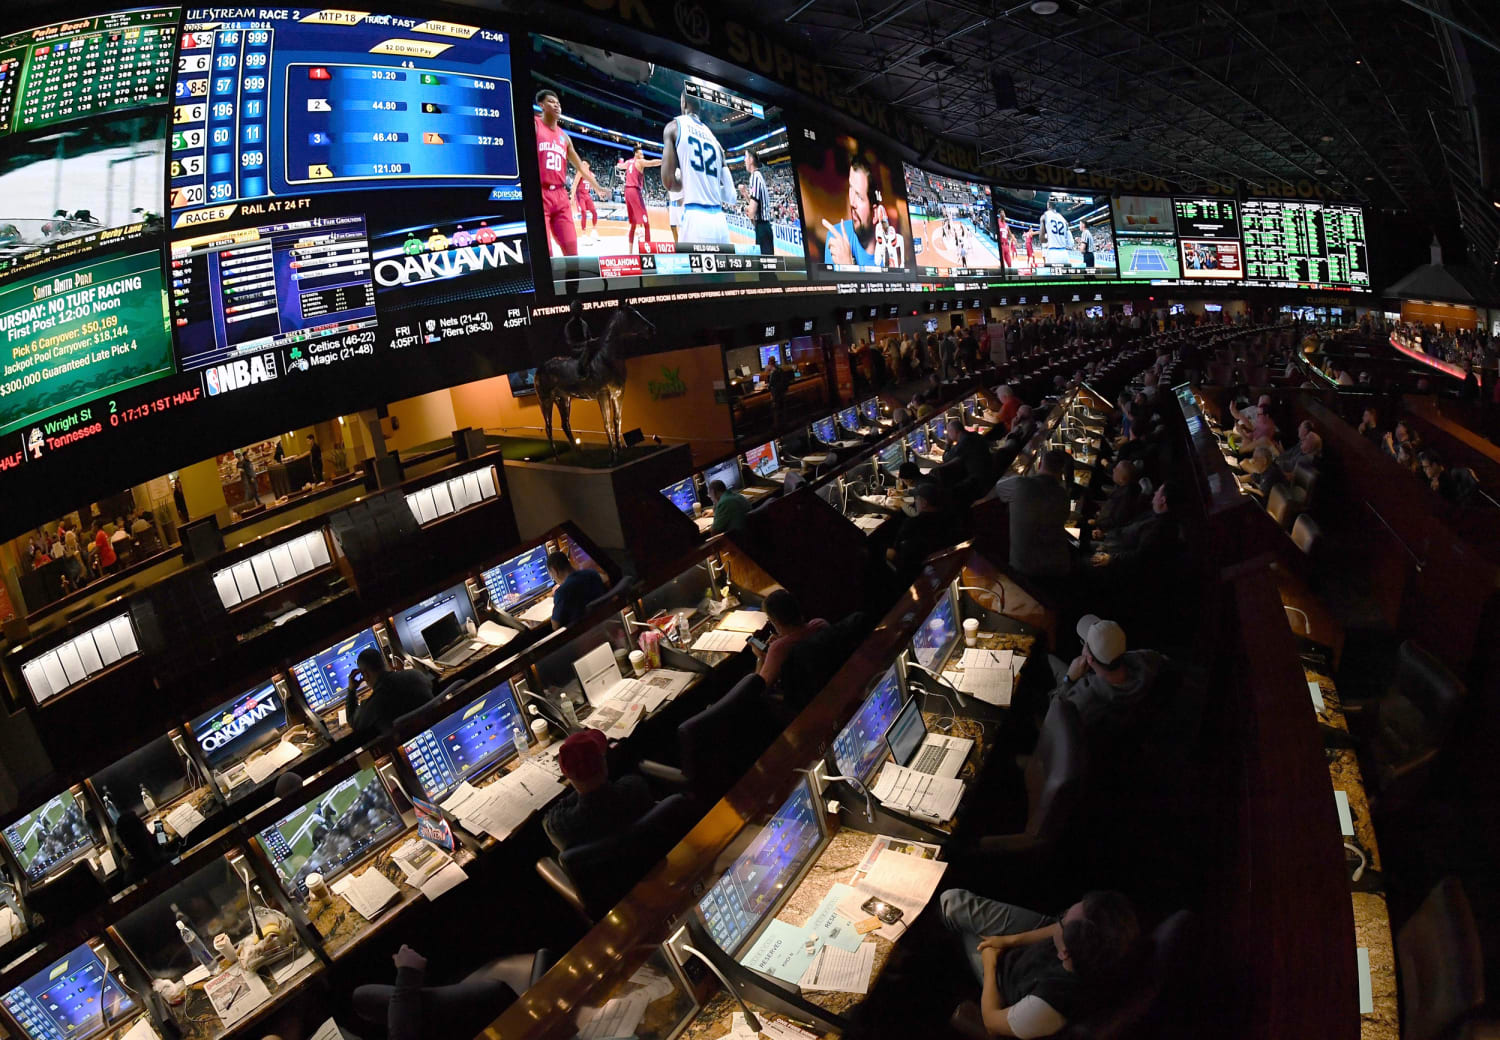 Best Sport Betting Site: A Listing Of 11 Issues That'll Put You In A Great Mood